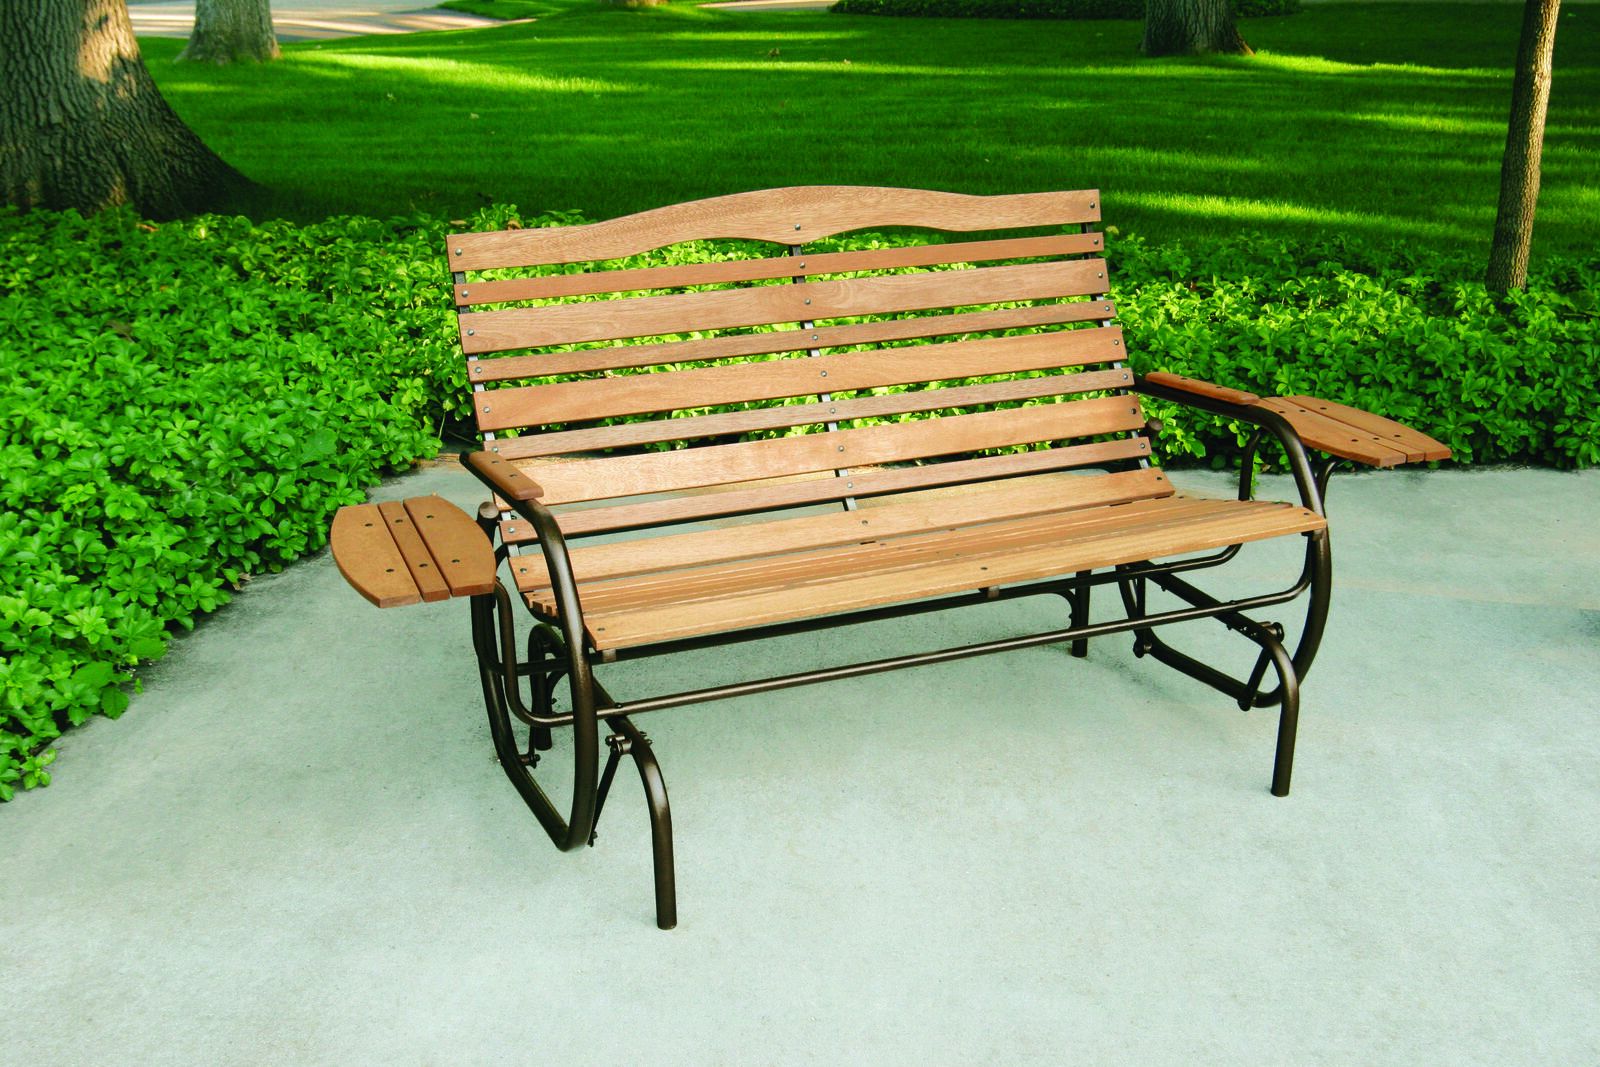 Details About Outdoor Wood Bench Glider Rocker 2 Seat W/trays Wooden High  Back Patio Furniture Pertaining To Hardwood Porch Glider Benches (View 19 of 25)